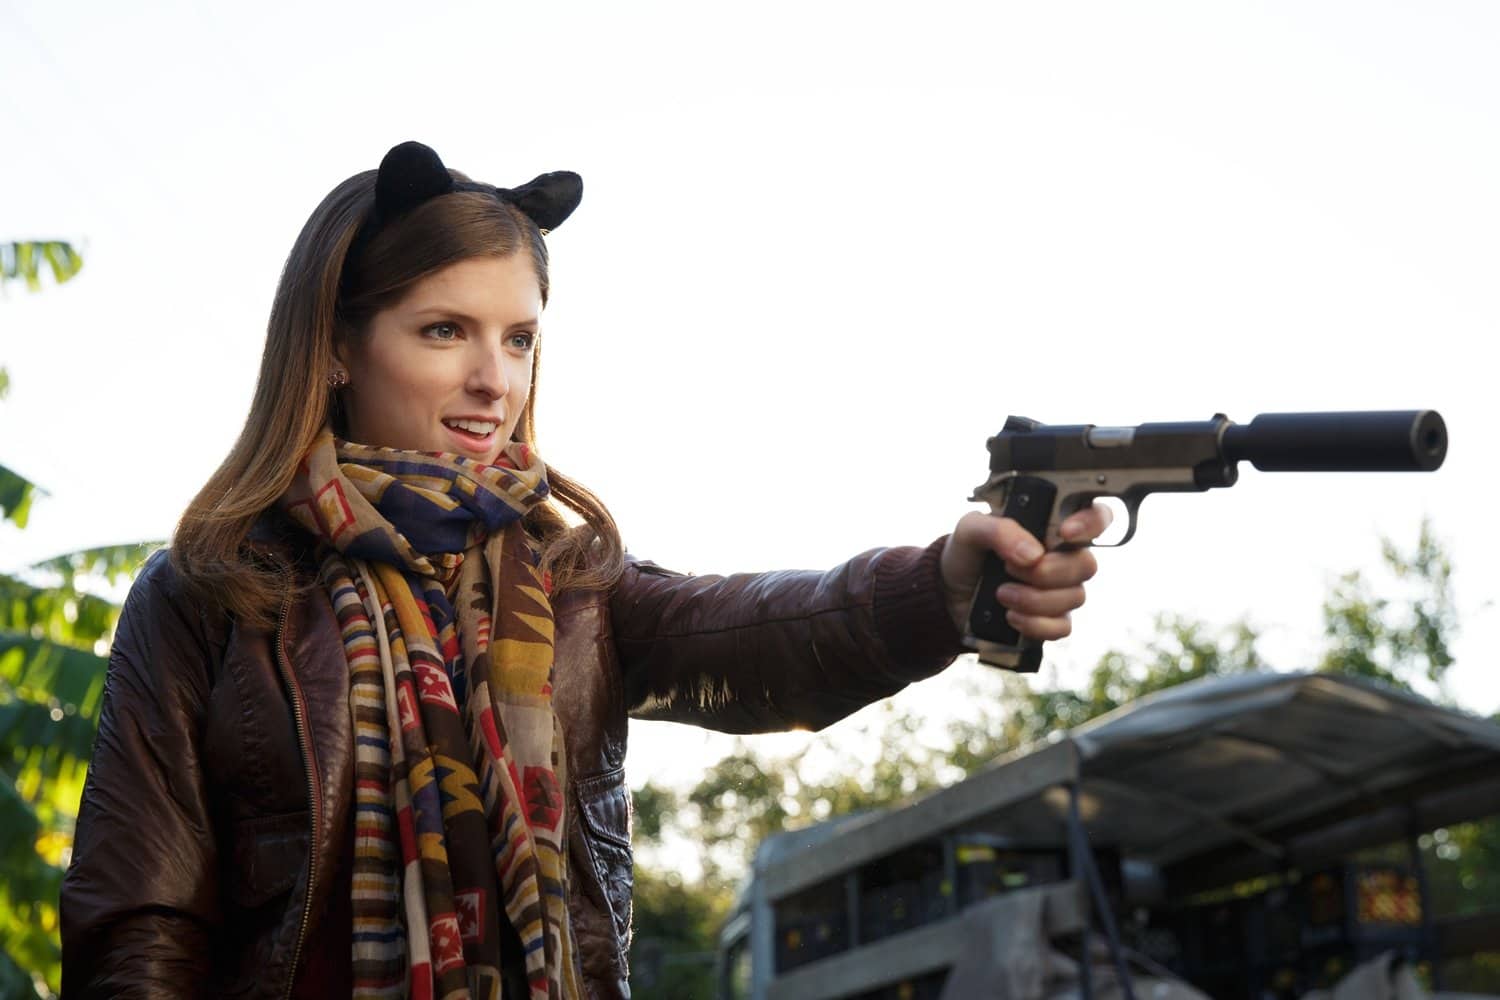 Anna Kendrick as Martha McKay, an over-optimistic young woman, in the 2015 American romantic action comedy film Mr. Right